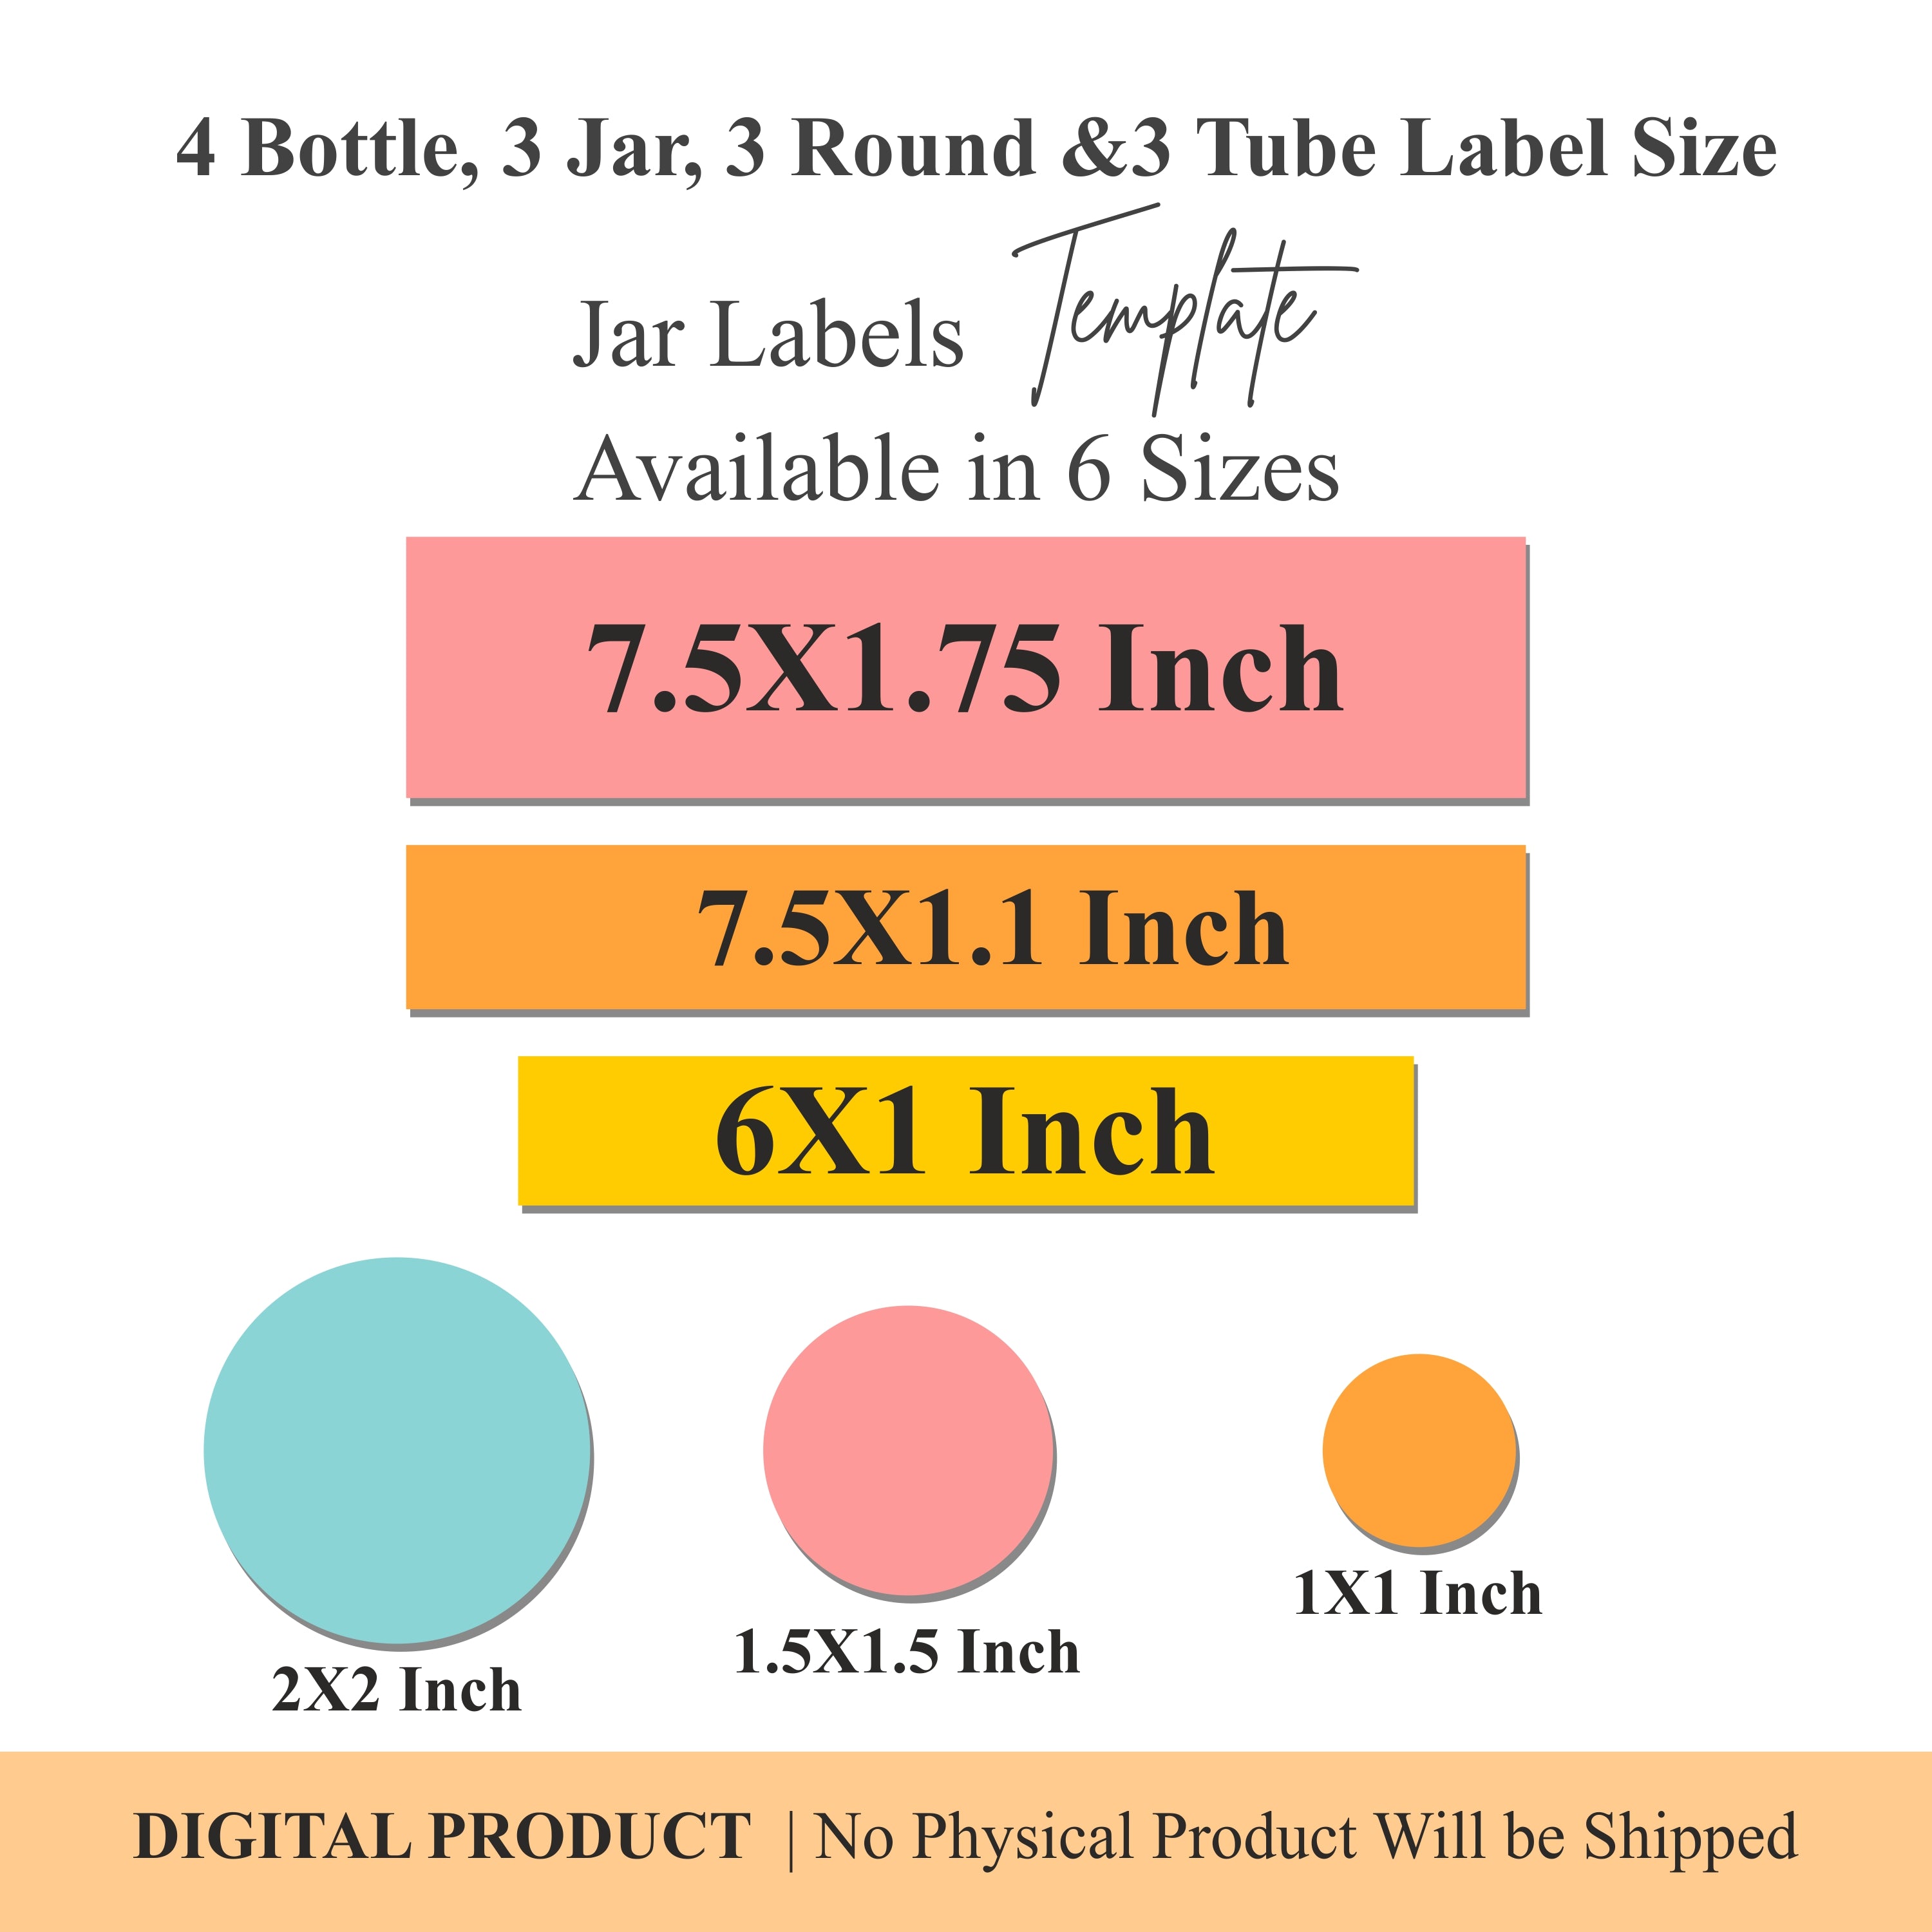 gold and glass jar empty plastic cream jarseditable bath and body product labelsrefillable cream jarsfrosted glass cosmetic jarspipette bottlebeauty product labelingserum containerprintable candle labelshandmade cosmetics labelprinting labelsproduct label designcosmetic labels    